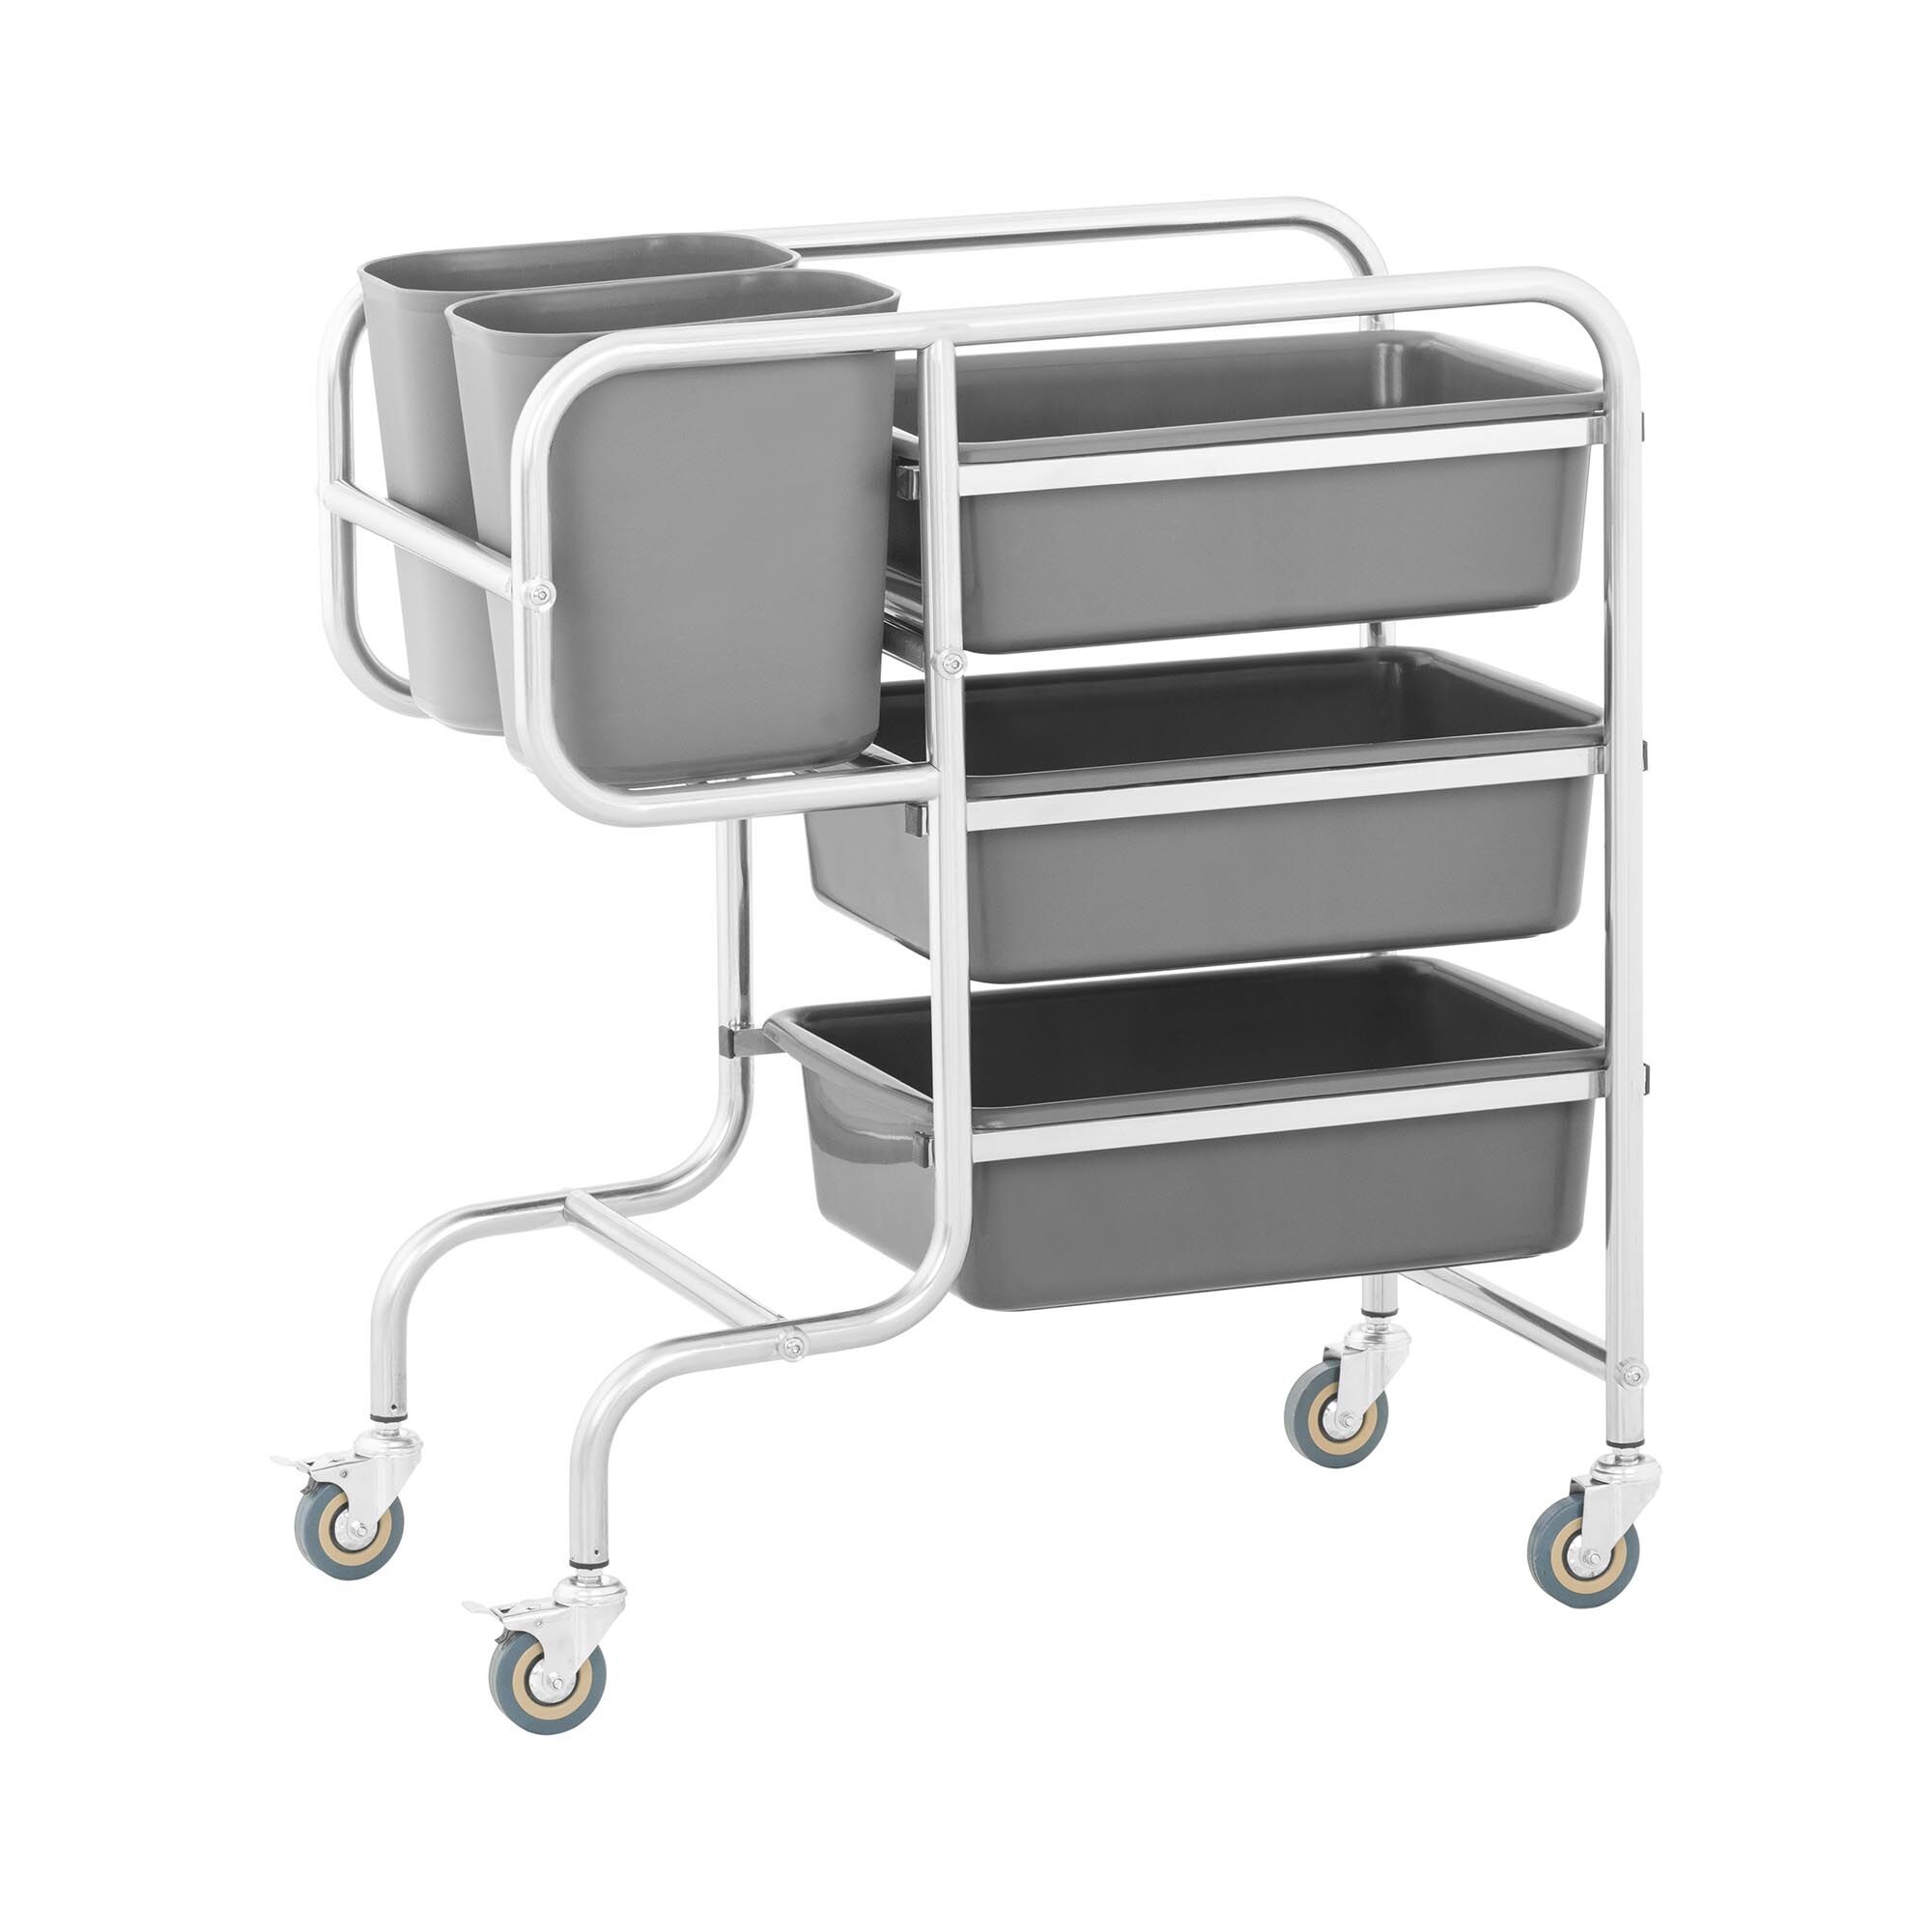 Royal Catering Bus Cart - 3 bus tubs - 2 rubbish bins - up to 84 kg